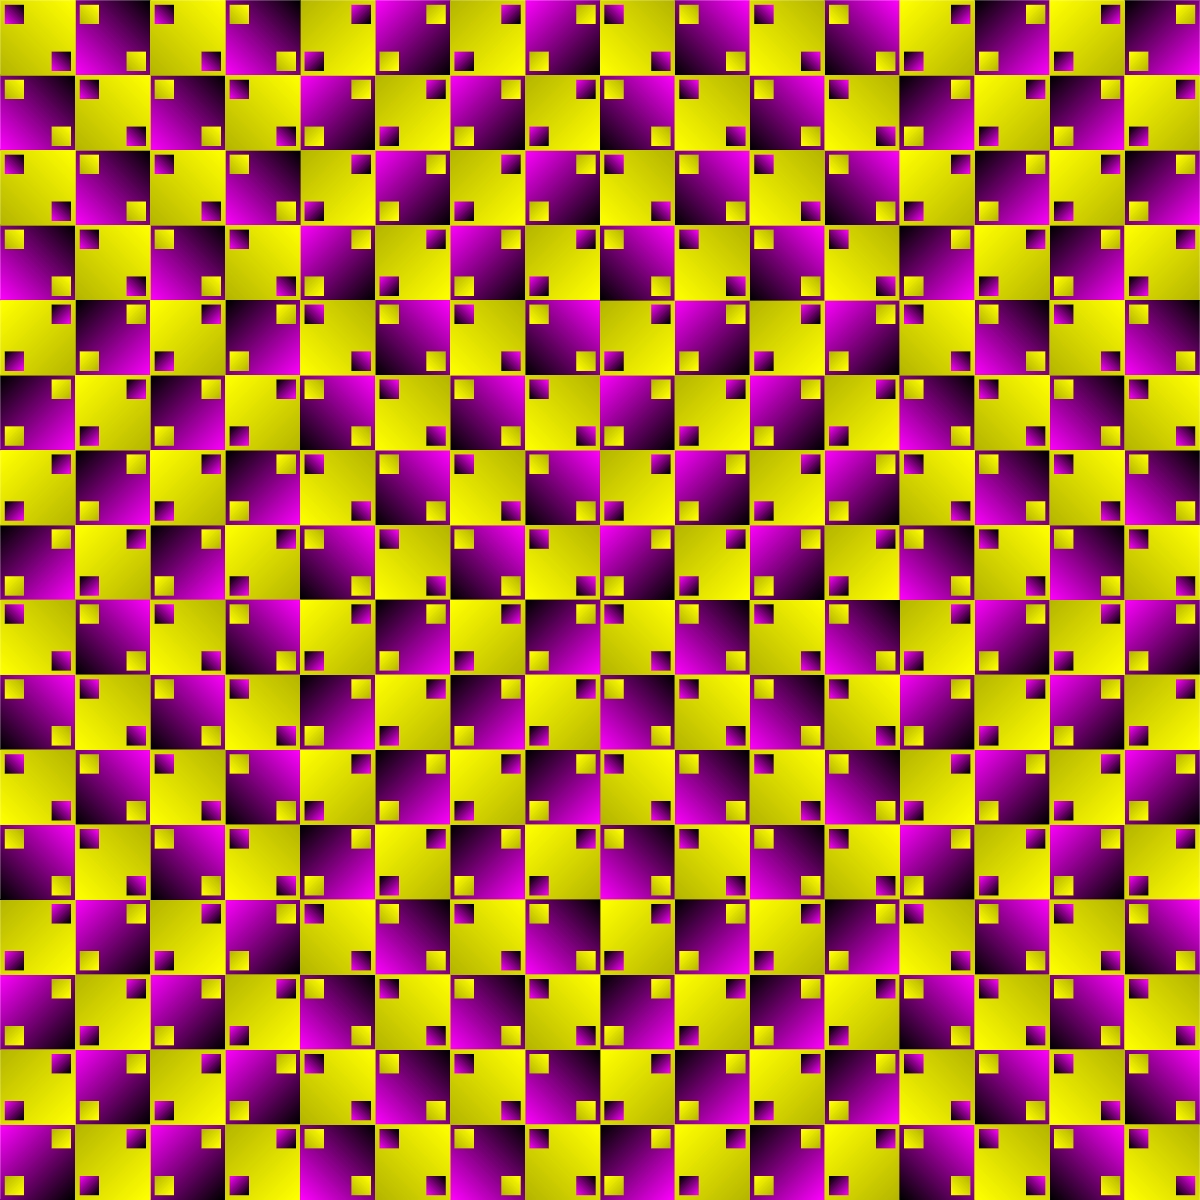 The pattern appears to move.